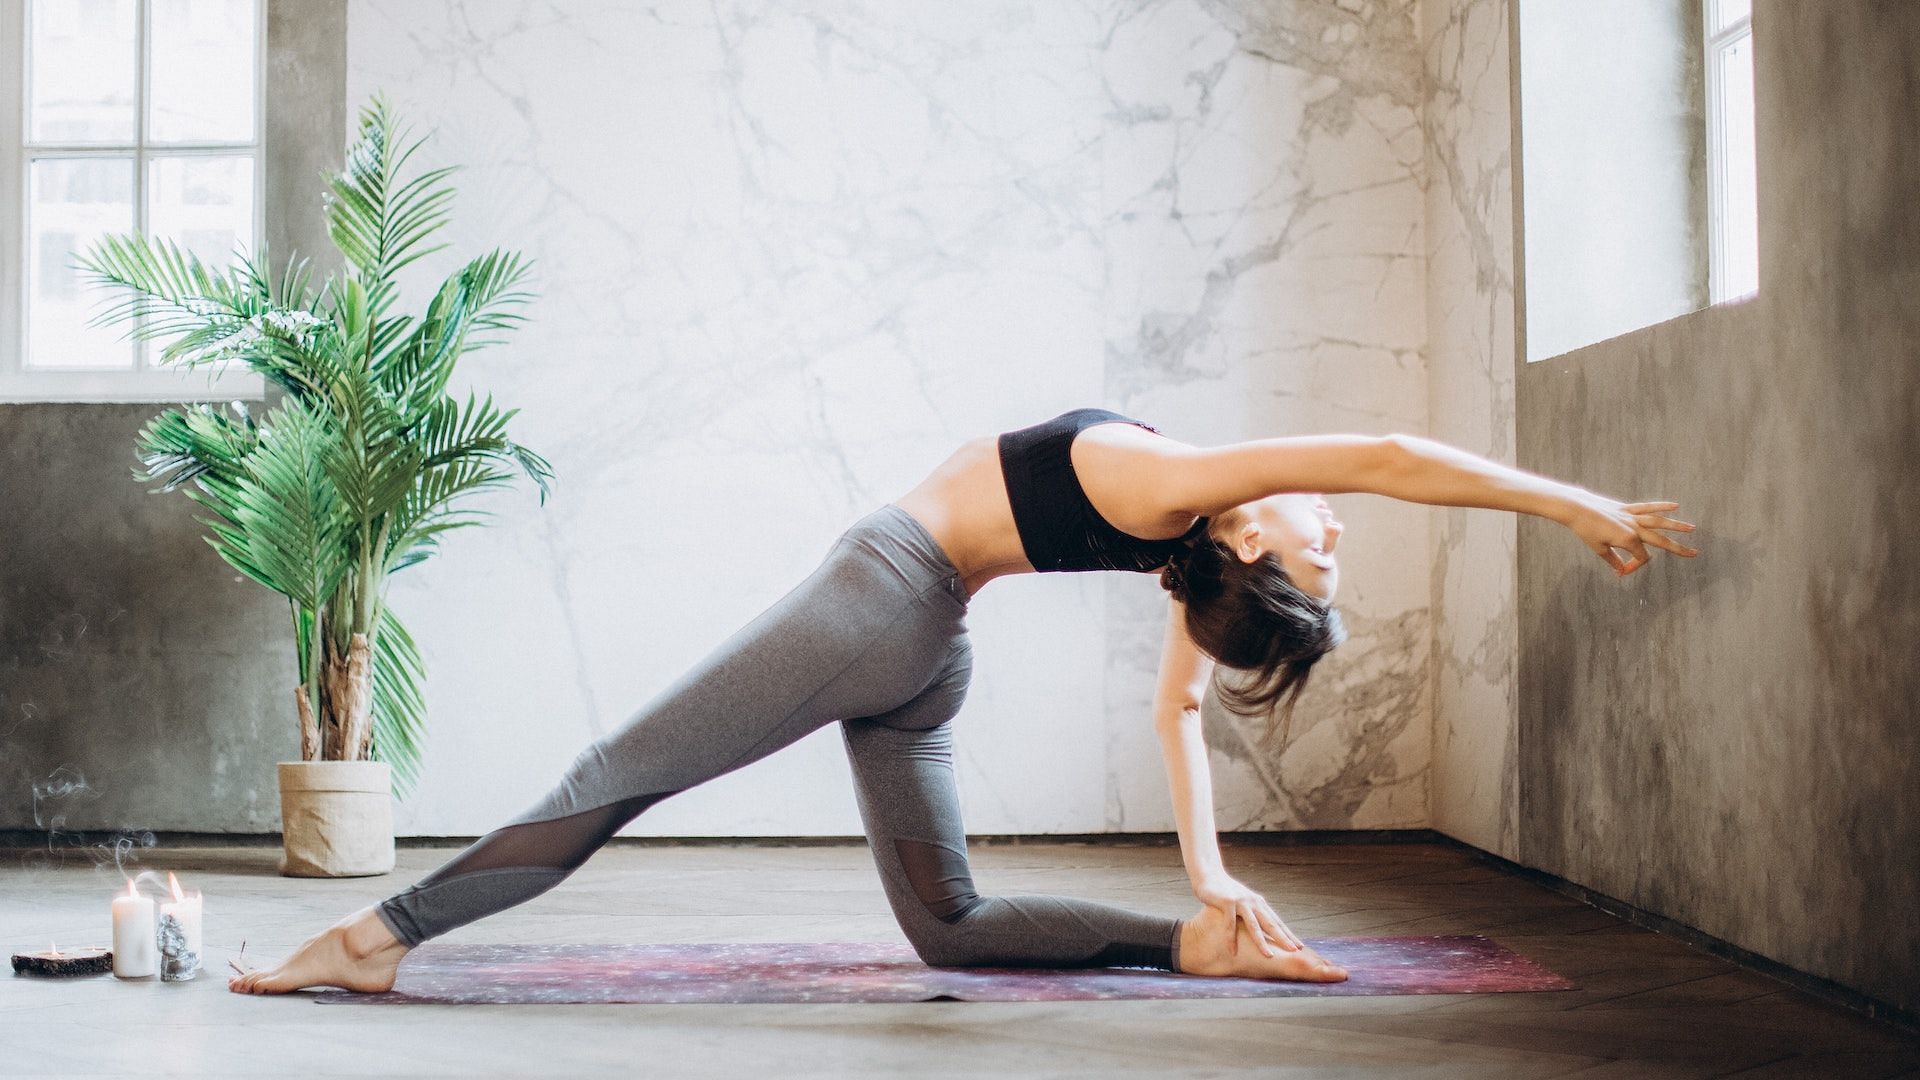 A slow-paced style of yoga. Image via Pexels/Elina Fairytale